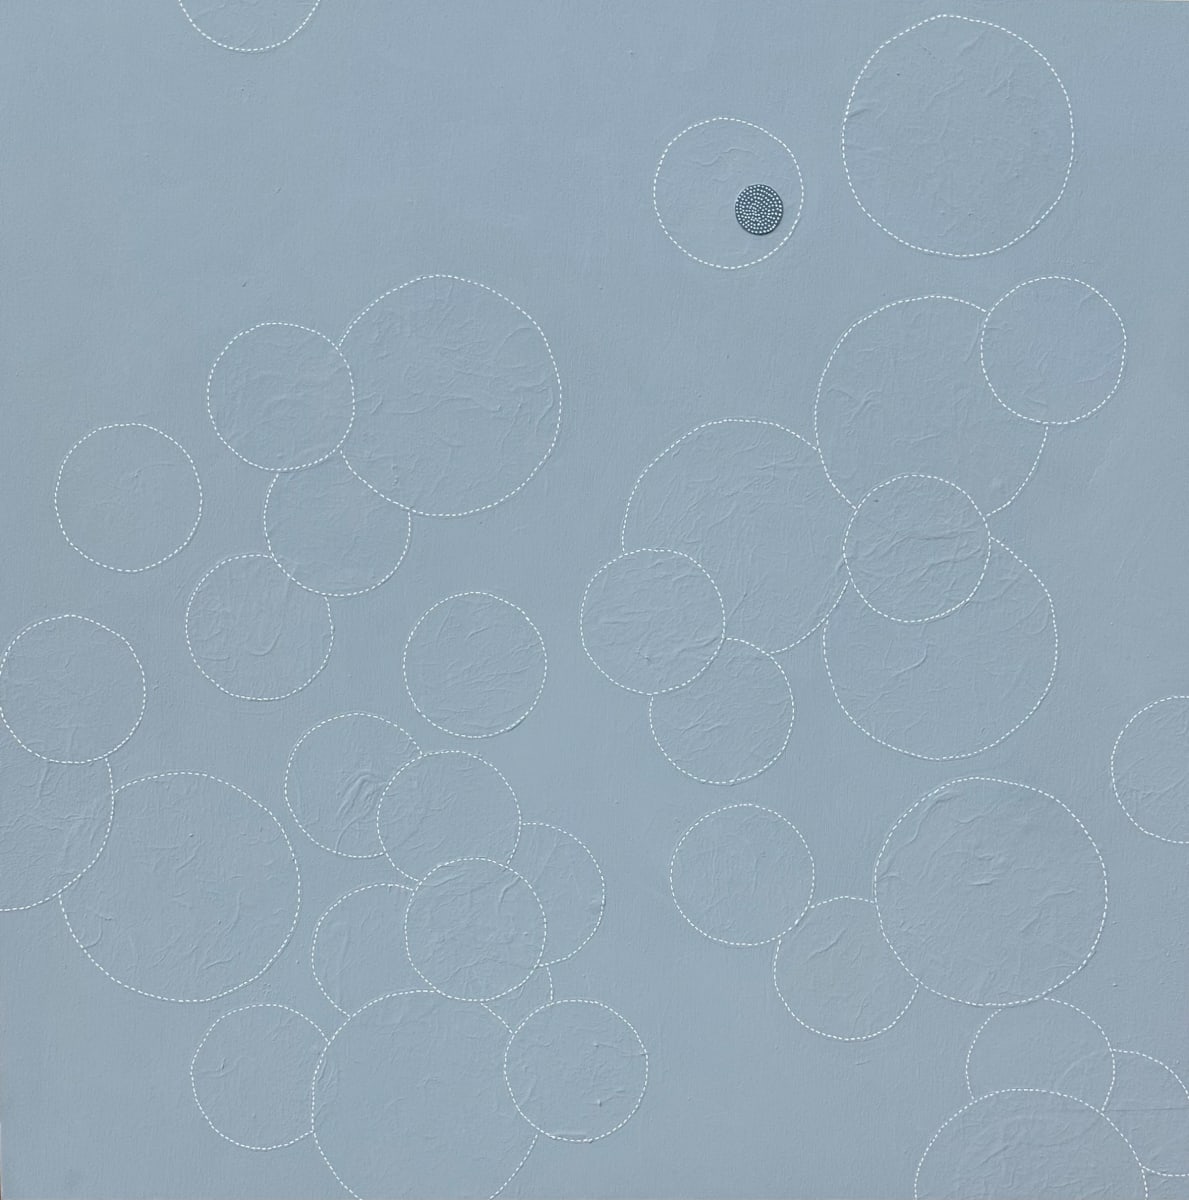 Dots 68, Pale Blue + Texture by Suzanne Gibbs  Image: Dots 68, Pale Blue + Texture Painting